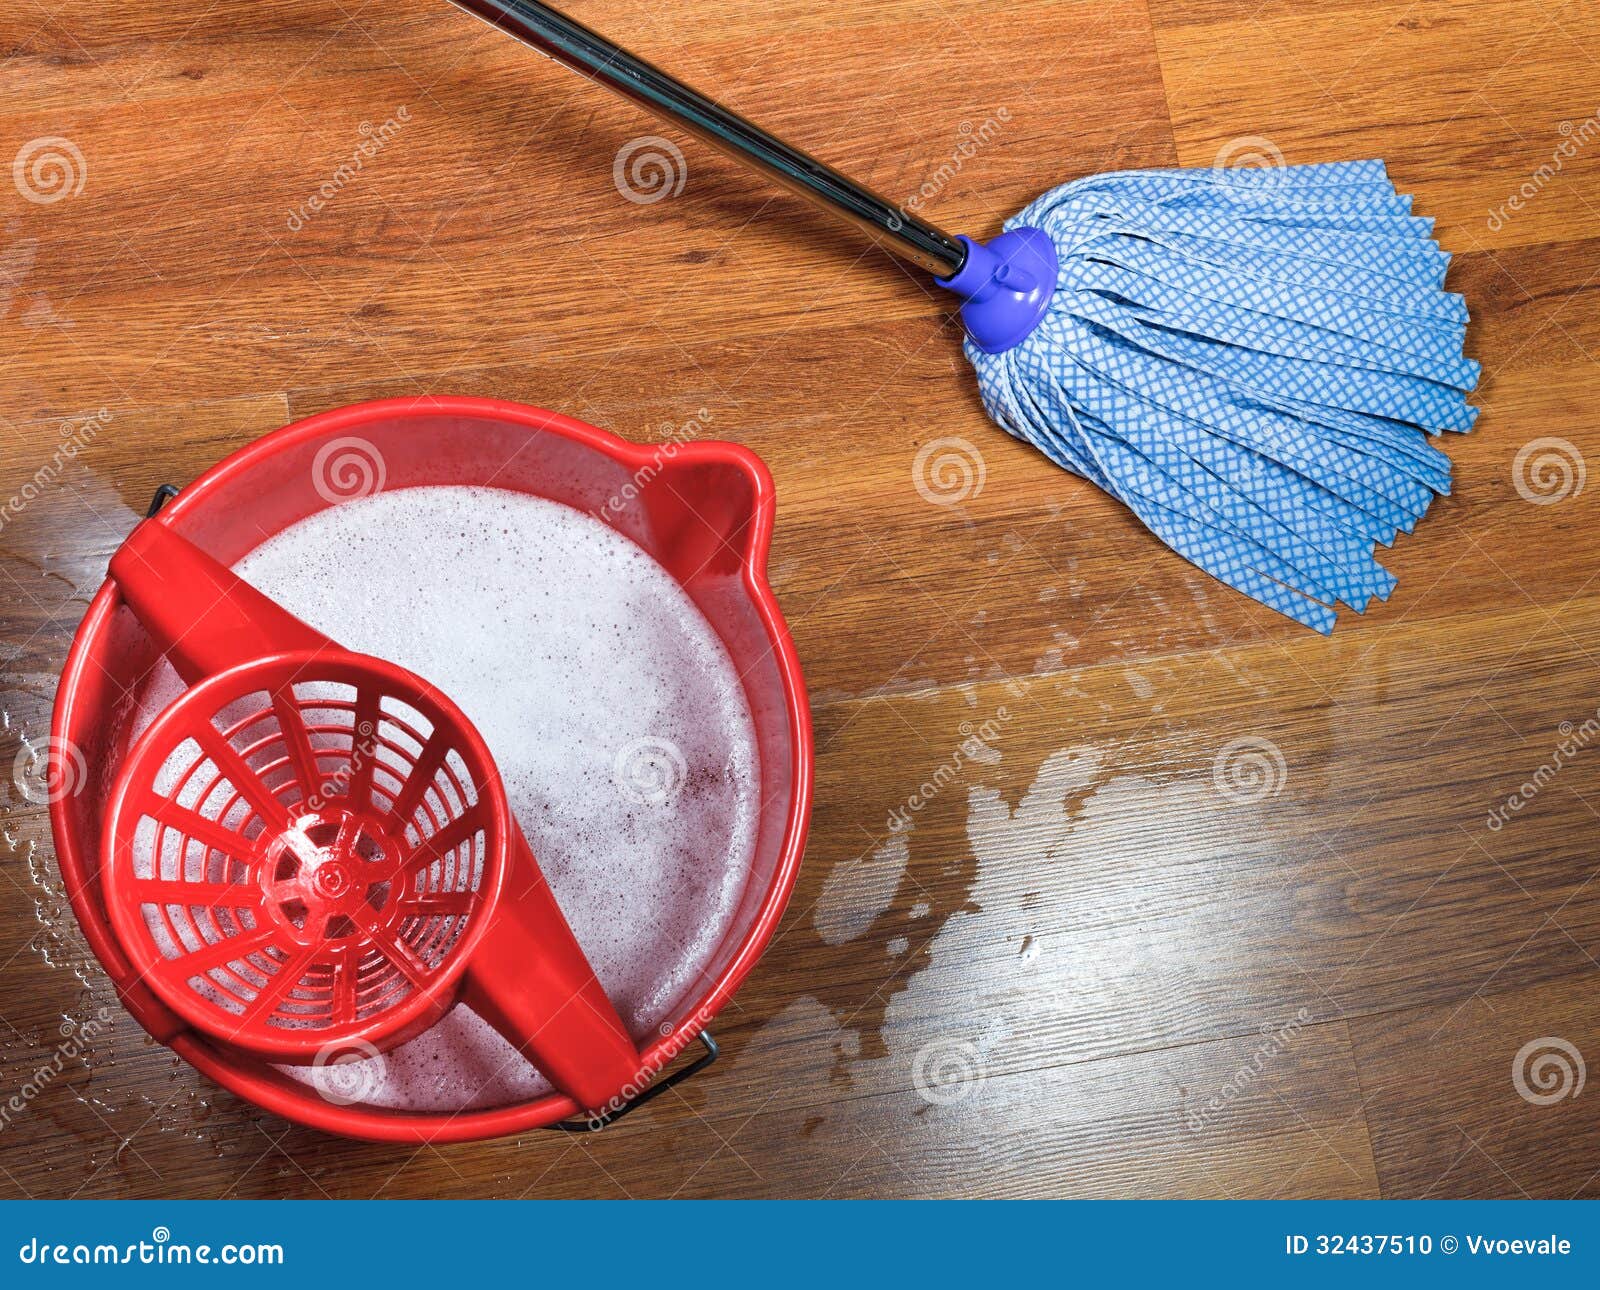 Mopping Of Wooden Floors Stock Photo - Image: 32437510